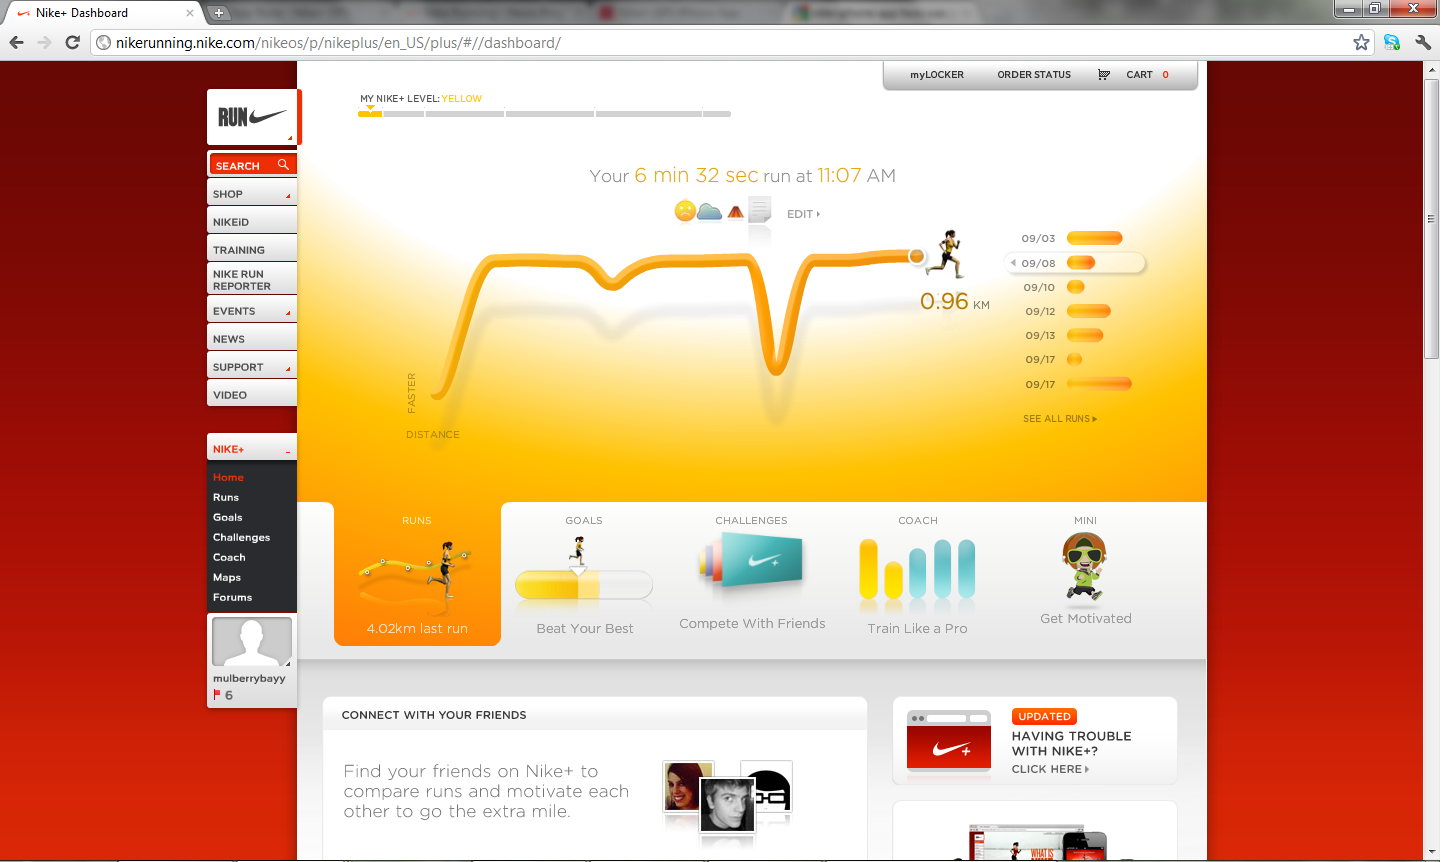 nikeplus-home-page[1]-gamification